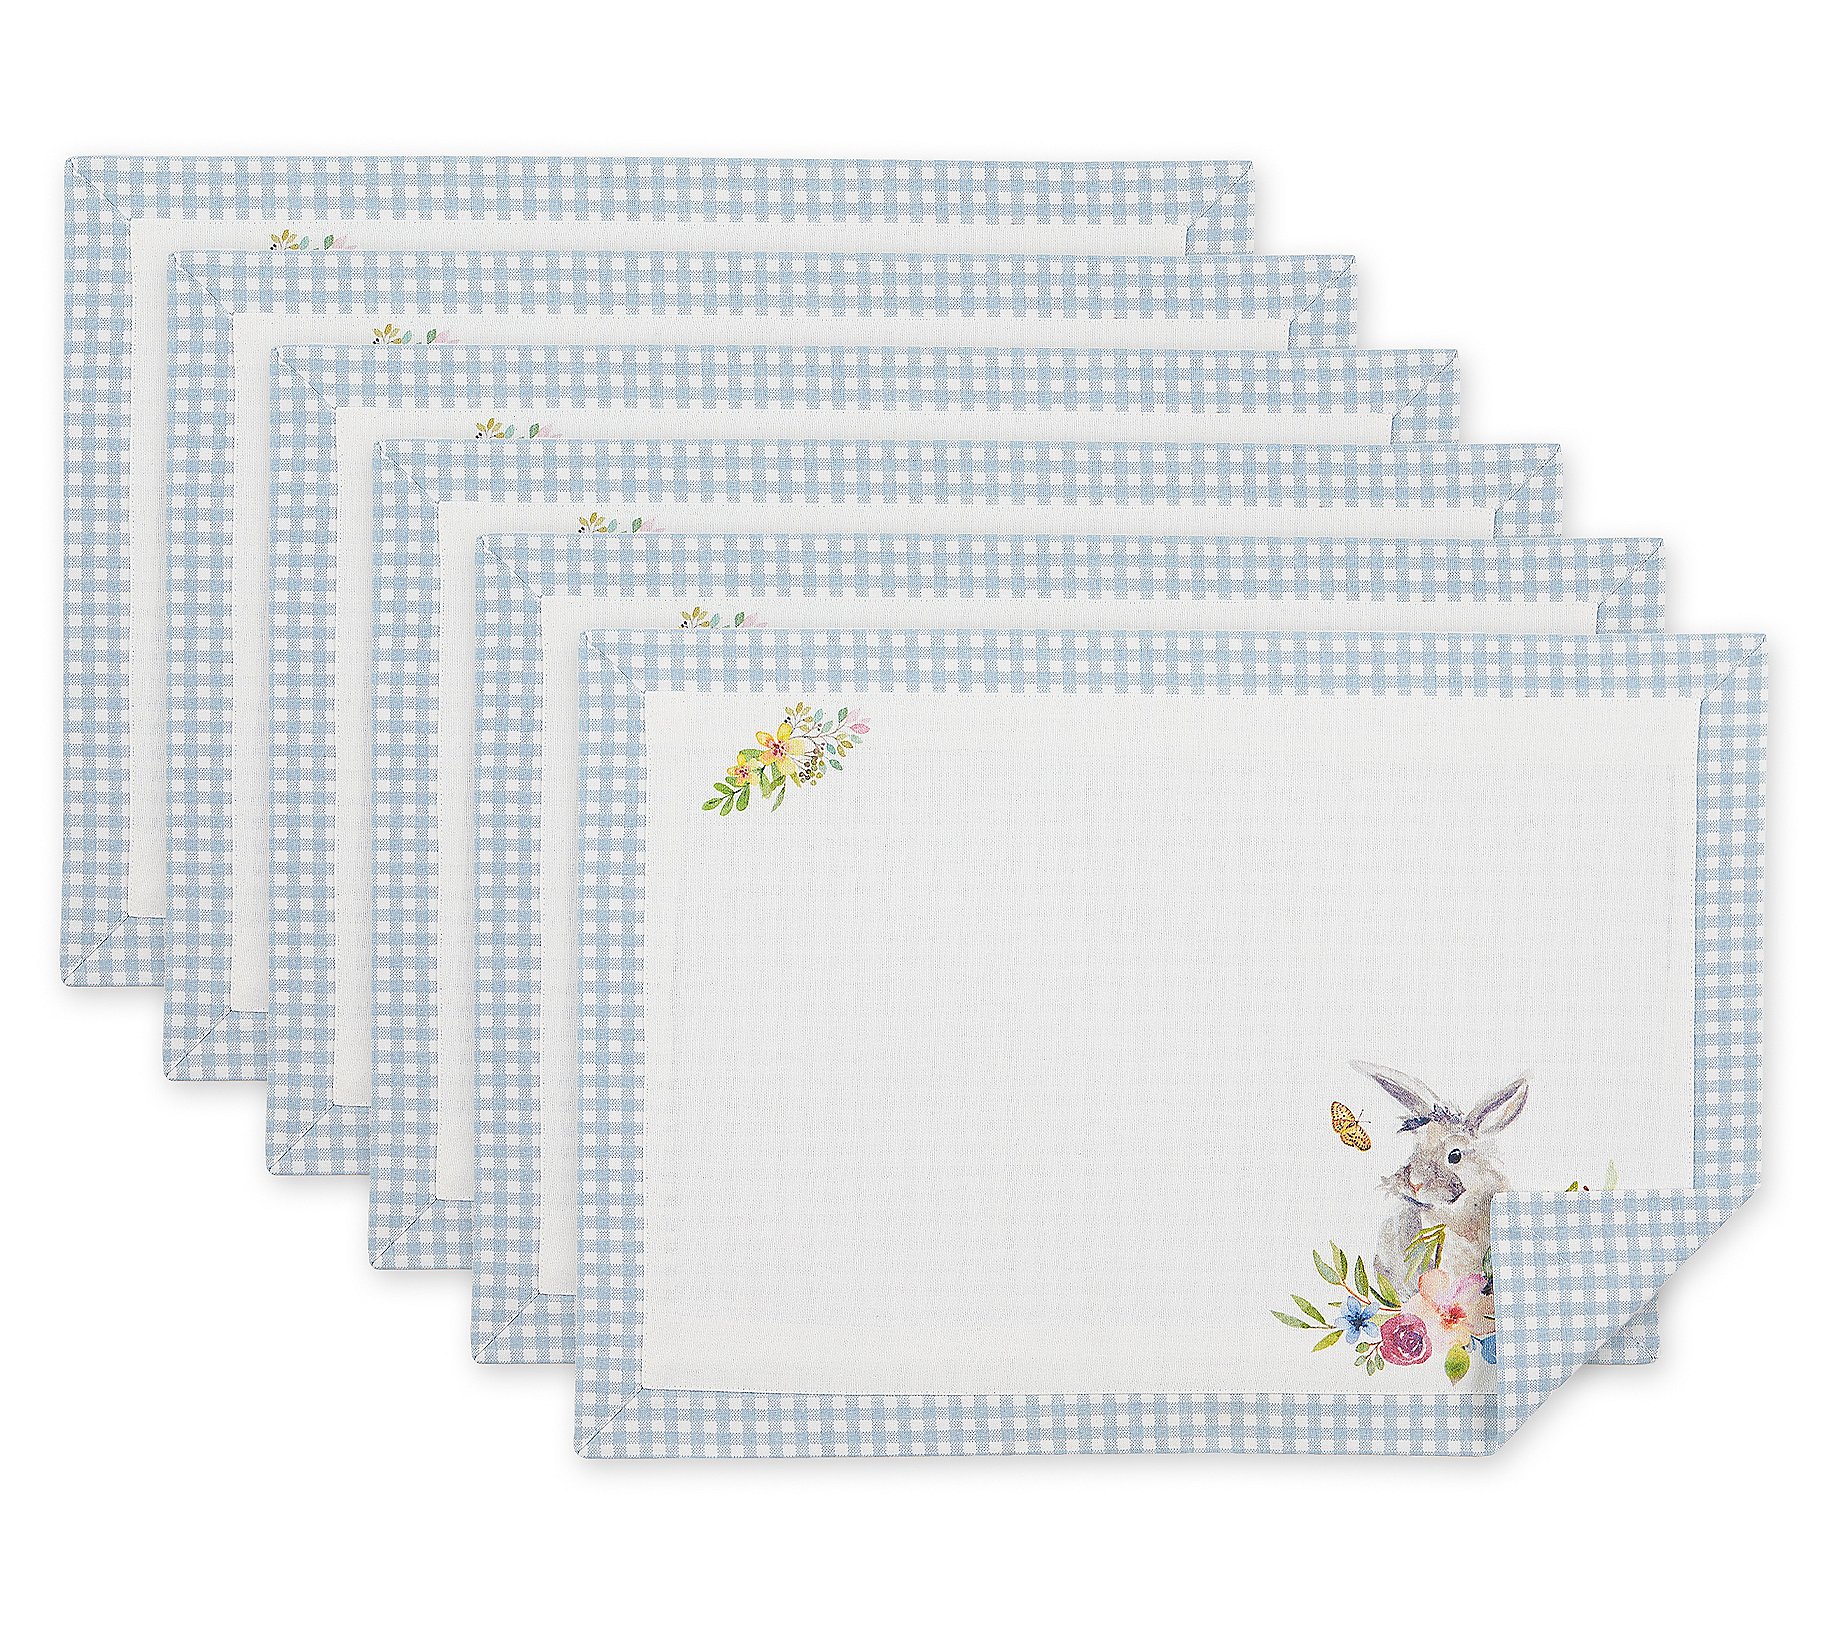 Design Imports Set of (6) Easter Bunny Placemats